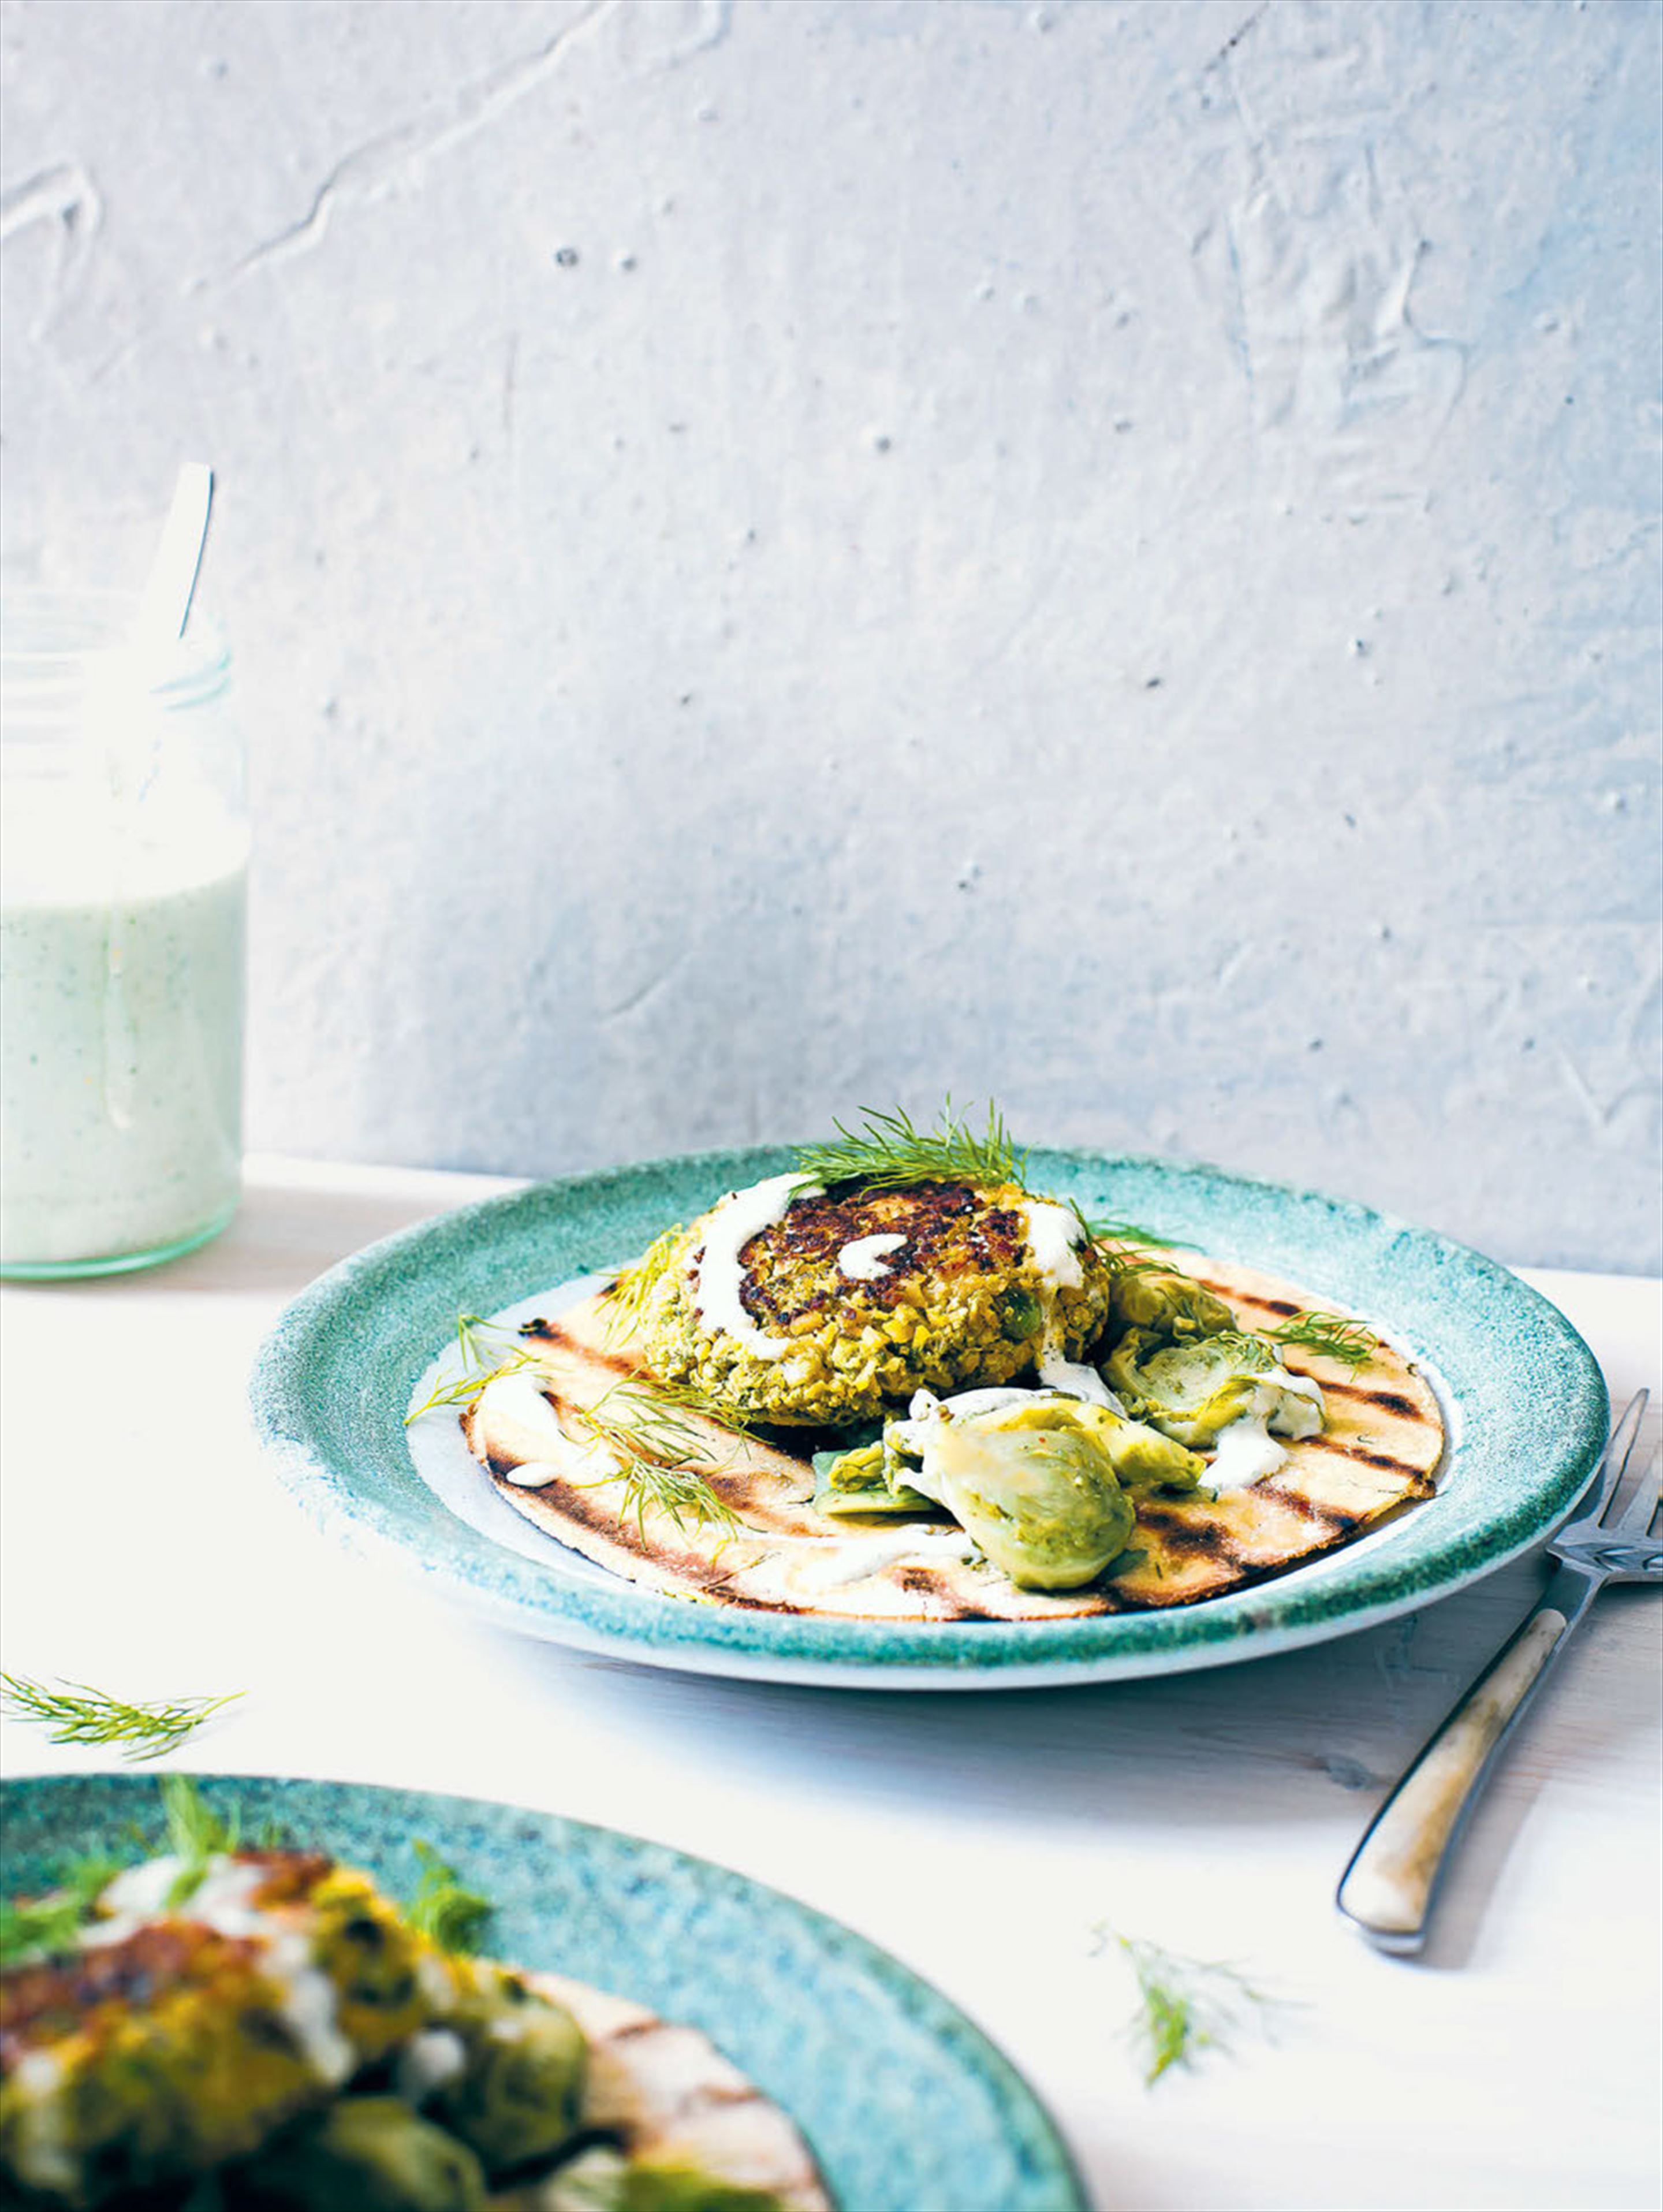 Quinoa flatbreads, with pea patties & brussels sprout kimchi